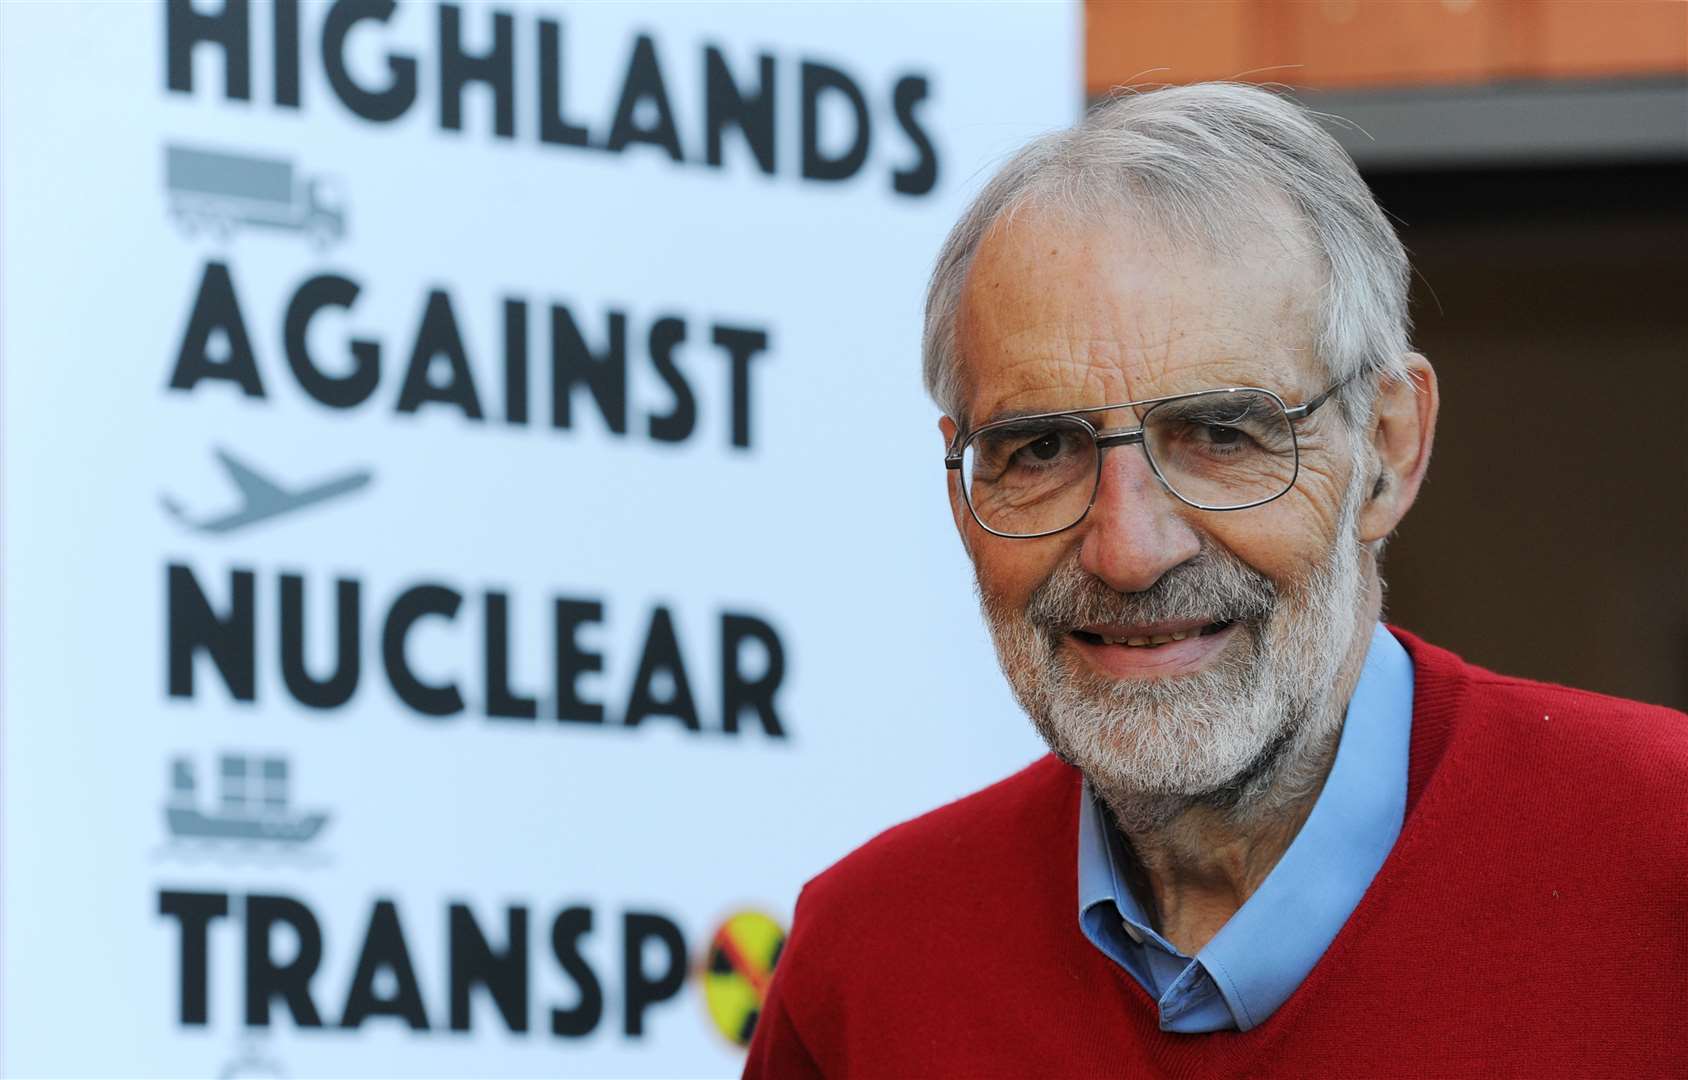 Tor Justad of Highlands Against Nuclear Transport is co-author of the letter. Picture: Eric Cormack